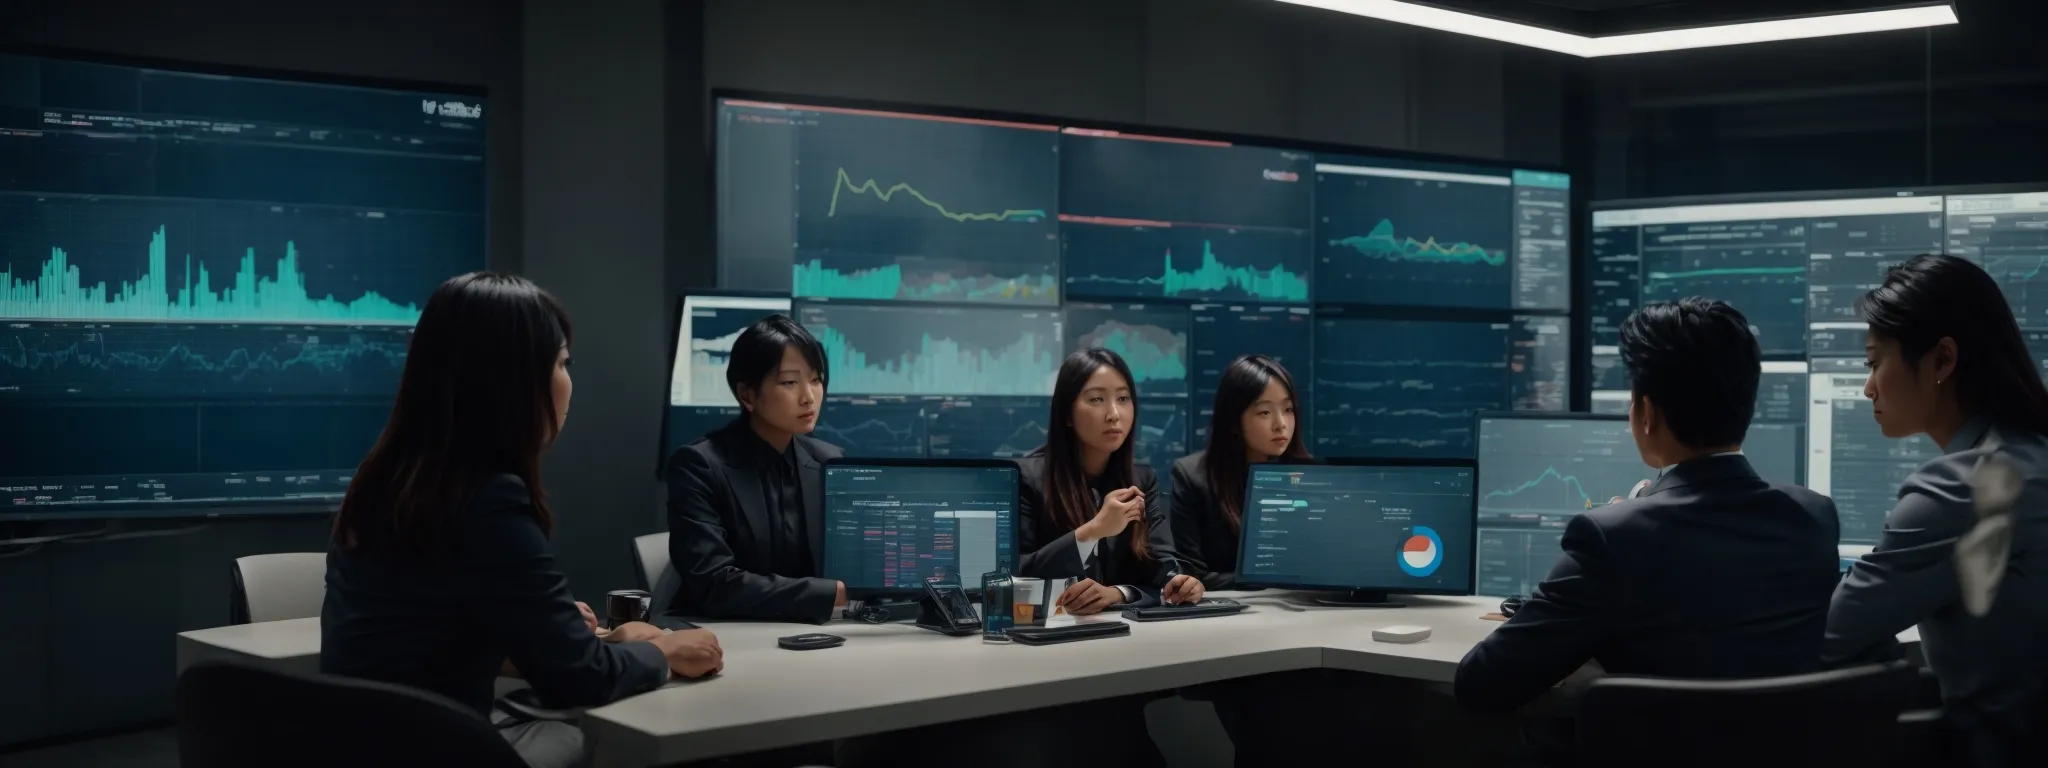 a team of marketers strategizes around a futuristic dashboard displaying analytics charts and consumer behavior predictions.